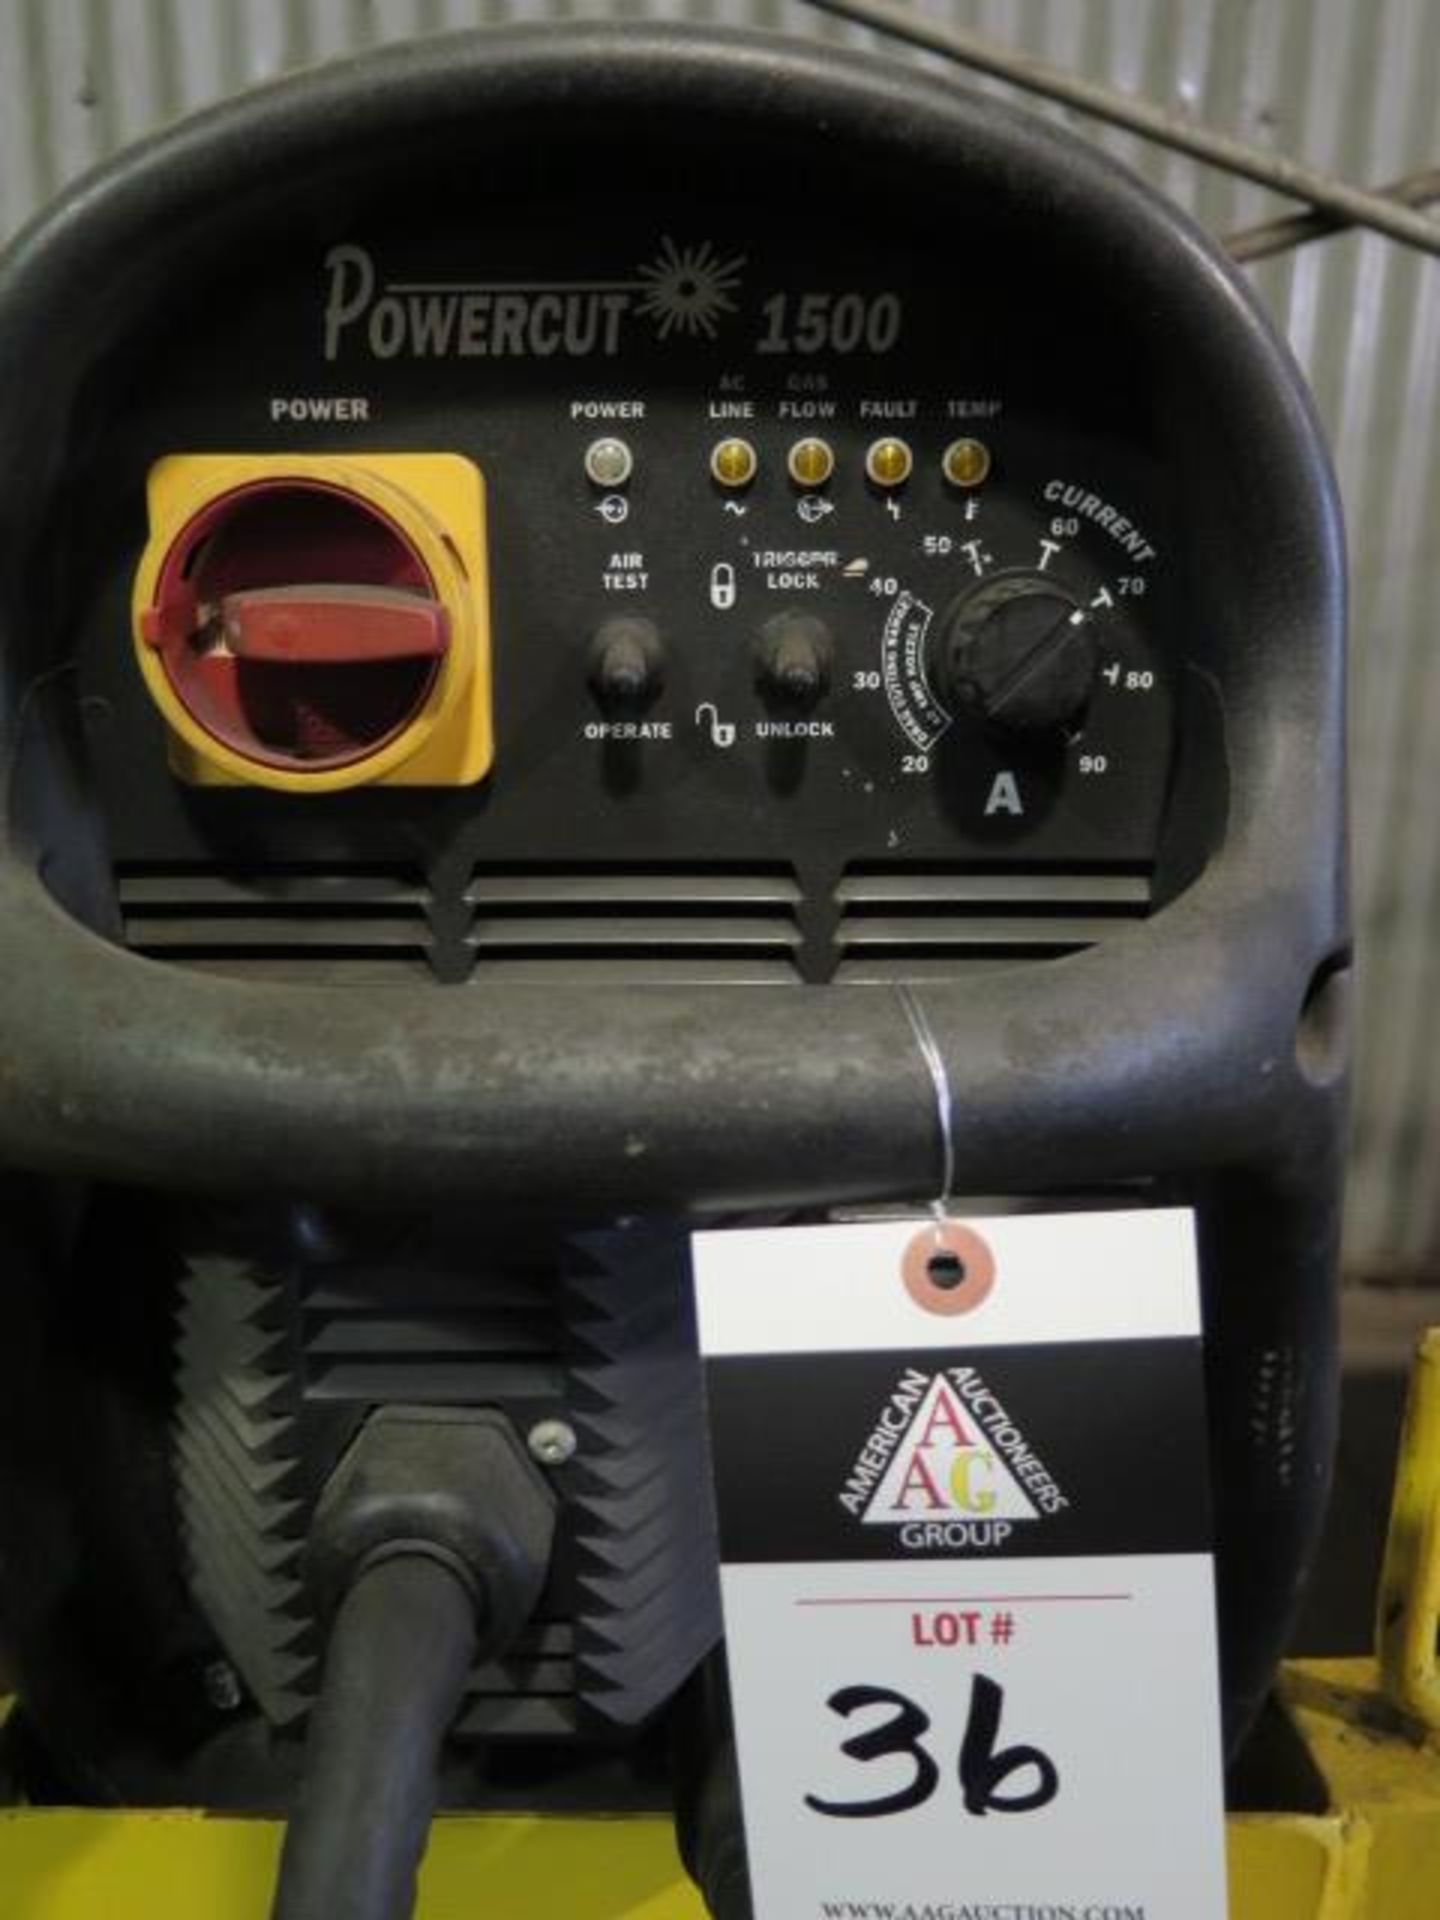 Esab Power Cut 1500 Plasma Power Source (SOLD AS-IS - NO WARRANTY) - Image 3 of 8